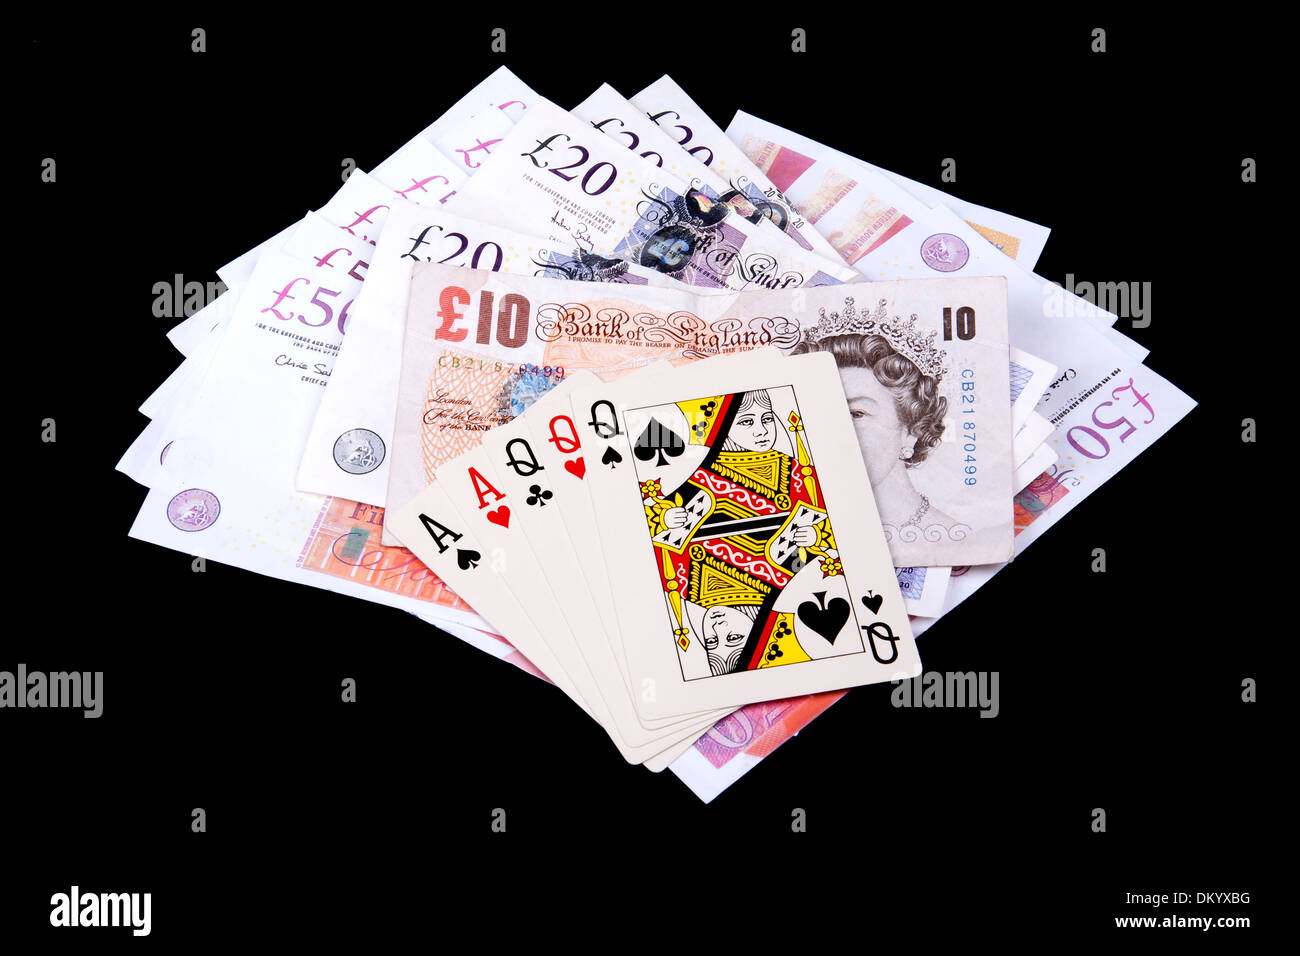 Playing cards and money in casino. Stock Photo